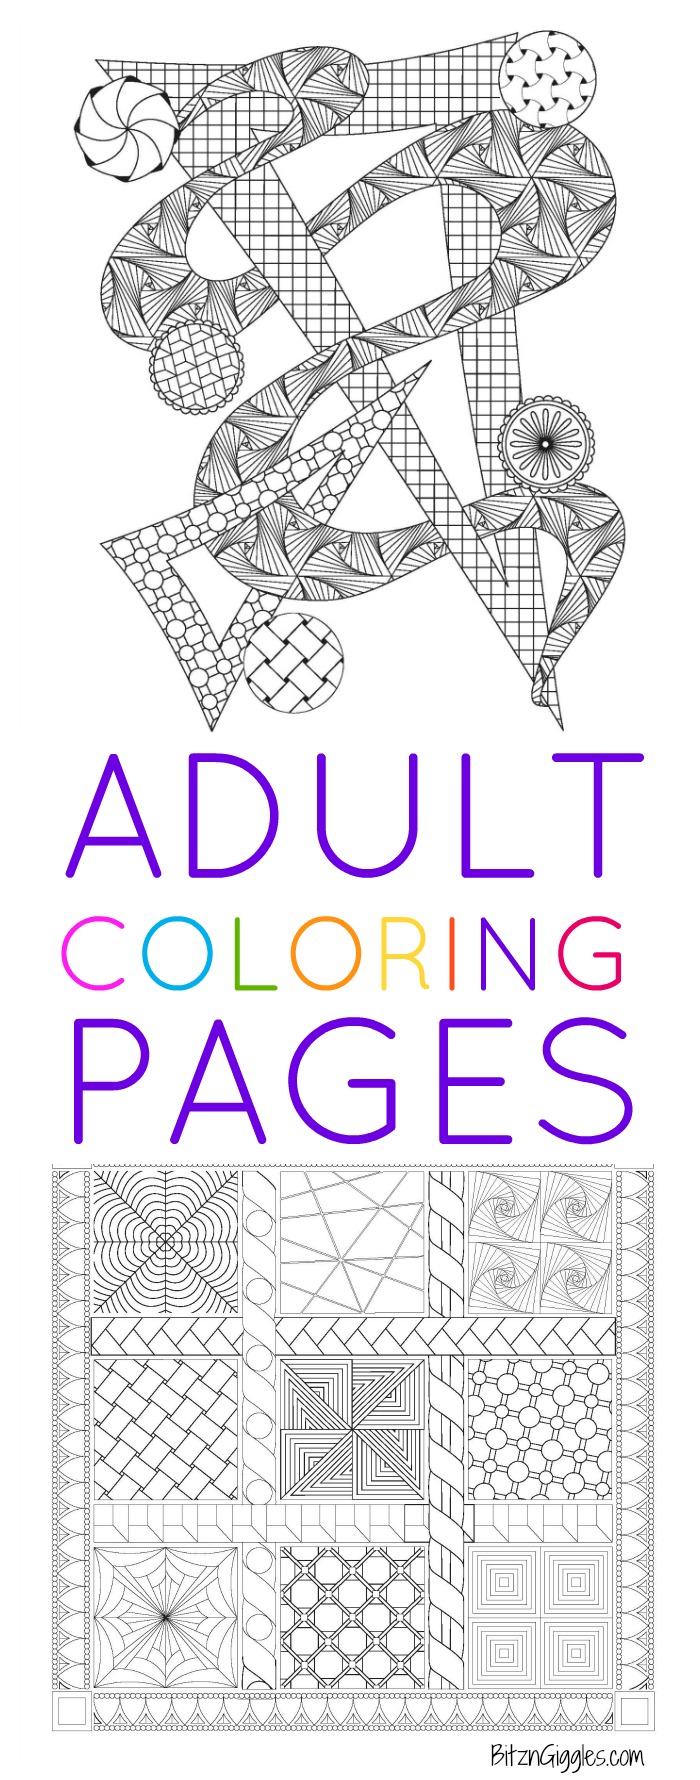 Free Printable Adult Coloring Pages - Two fun designs to choose from! A fun and relaxing experience when you need a little break!